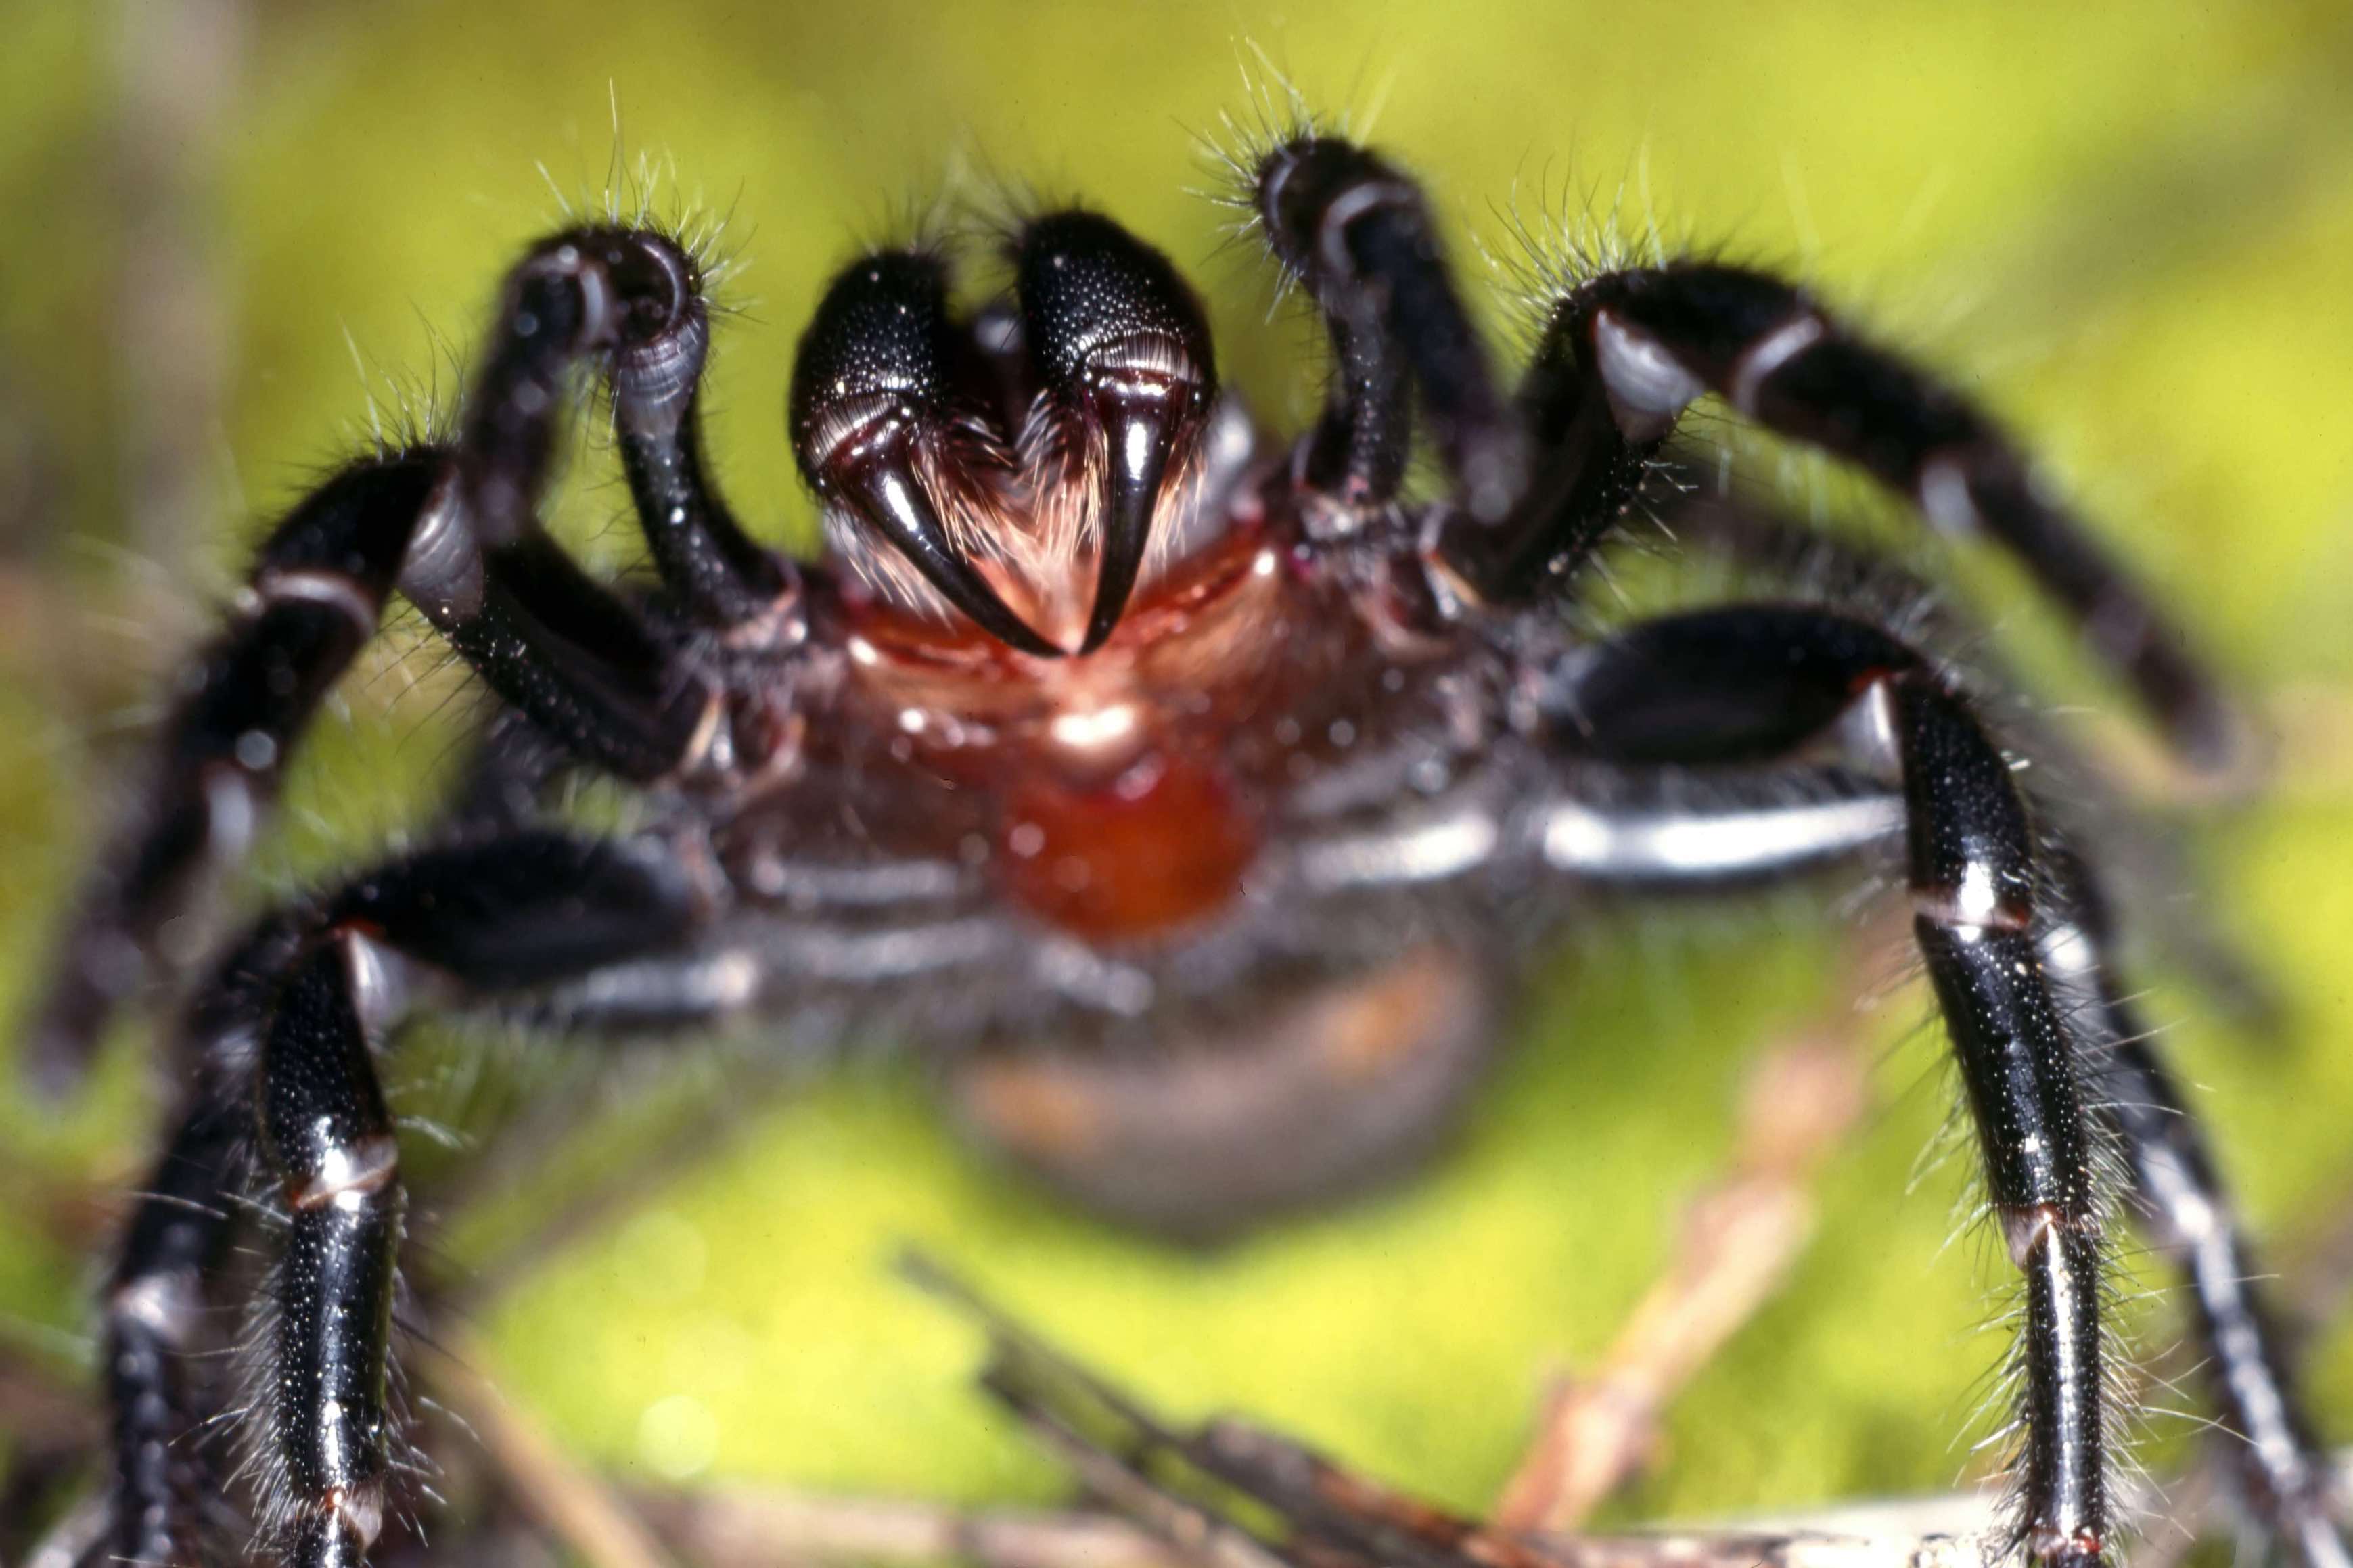 Can you die from a spider bite in Australia?